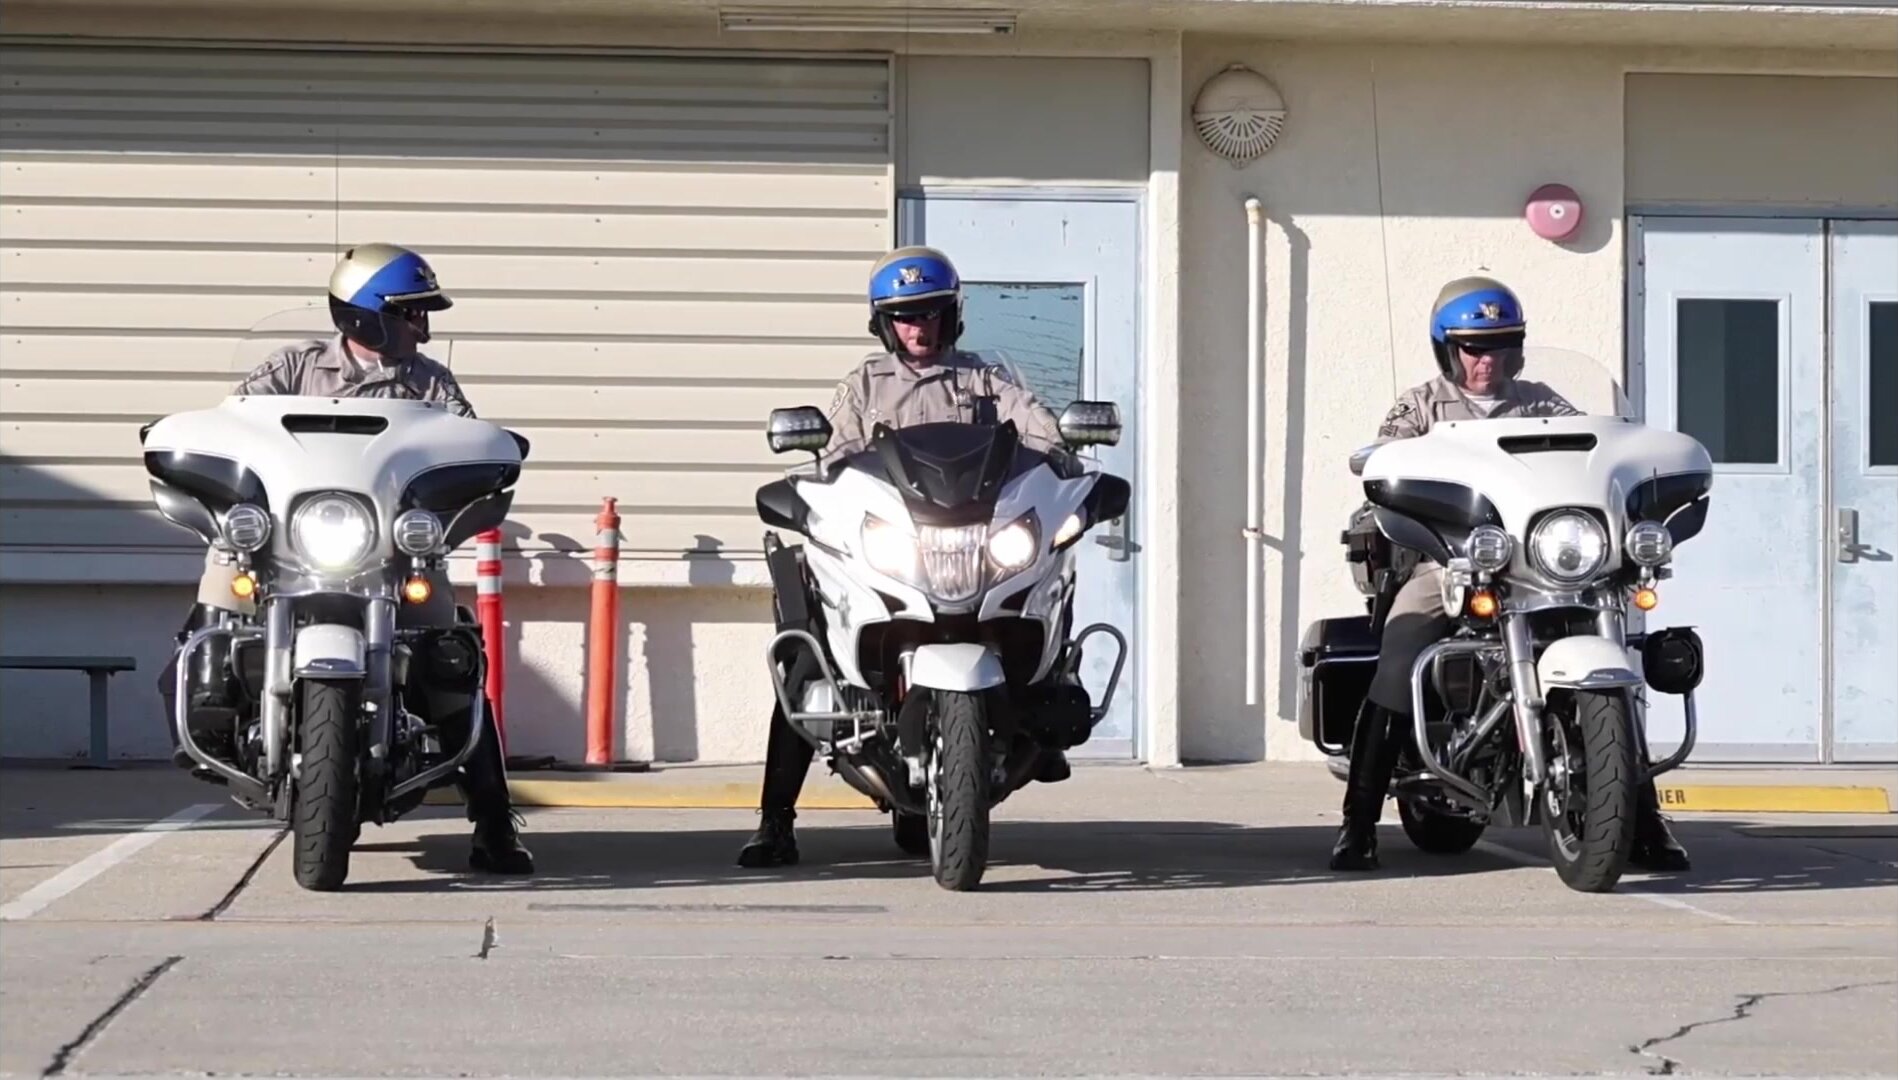 CHP Motorcycle Cops